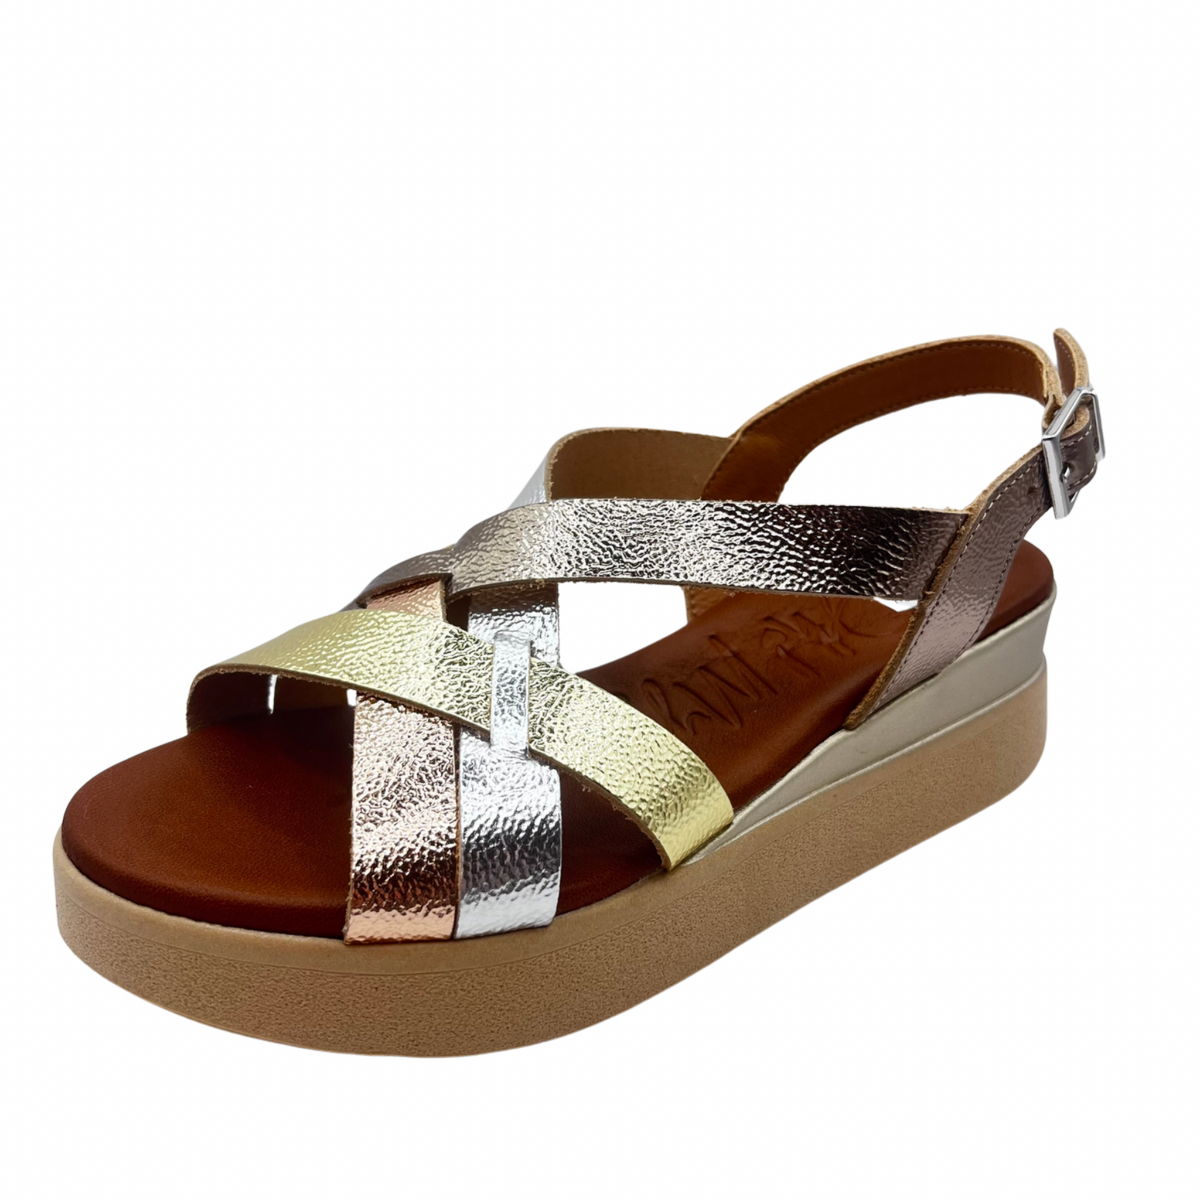 Oh My Sandals Metallic Mix Wedge Leather Sandal